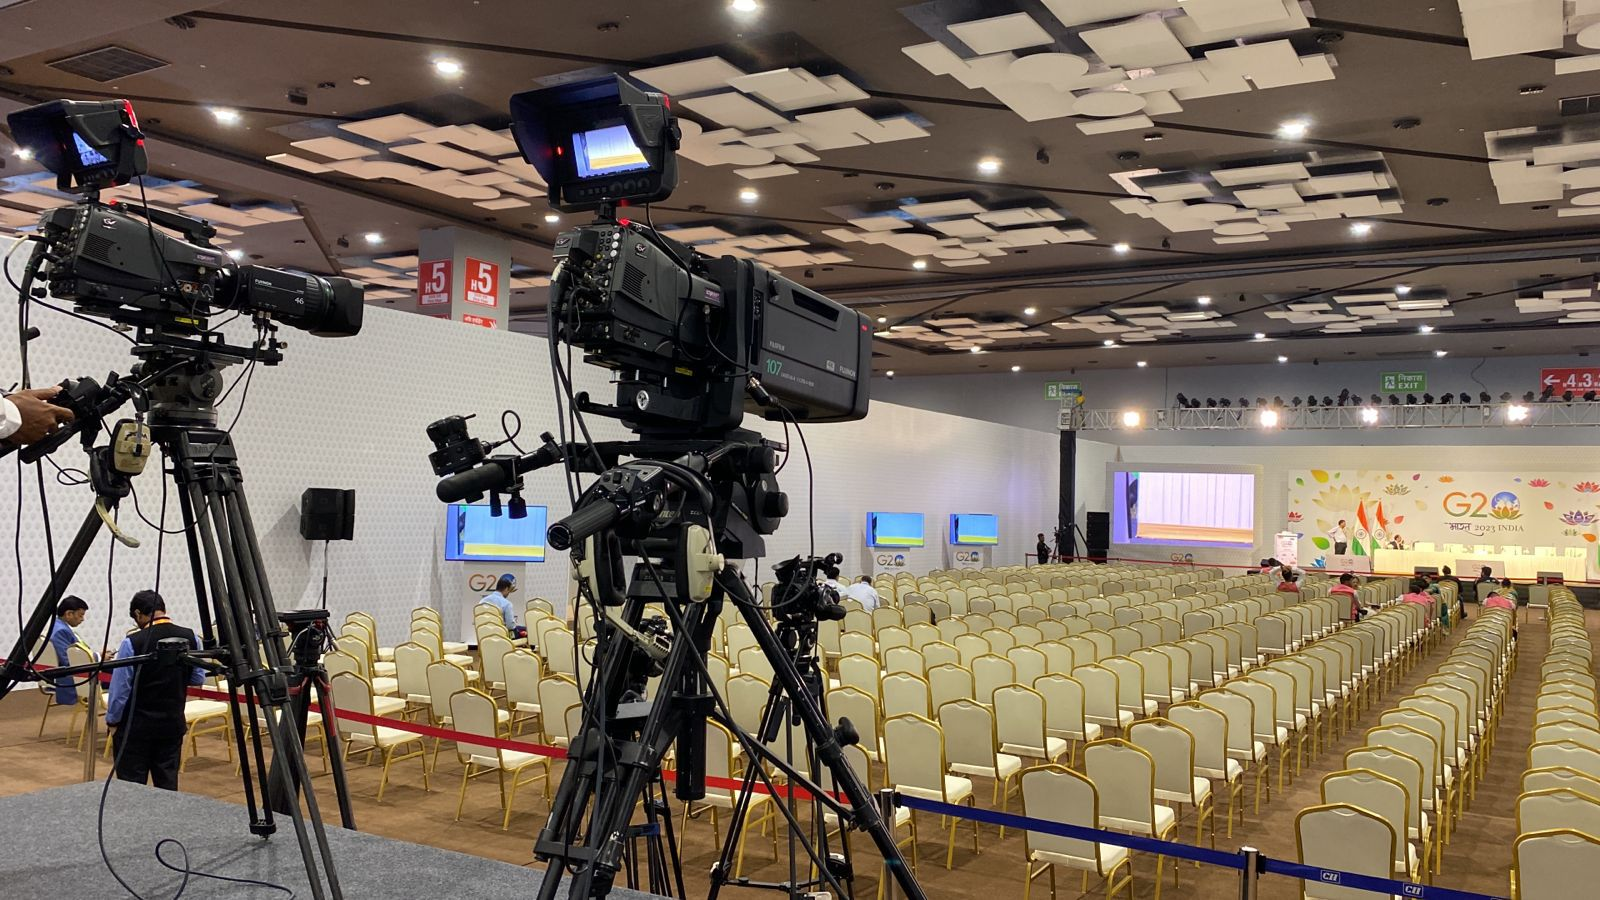 G20 India Summit: Konvision Monitors Play a Role